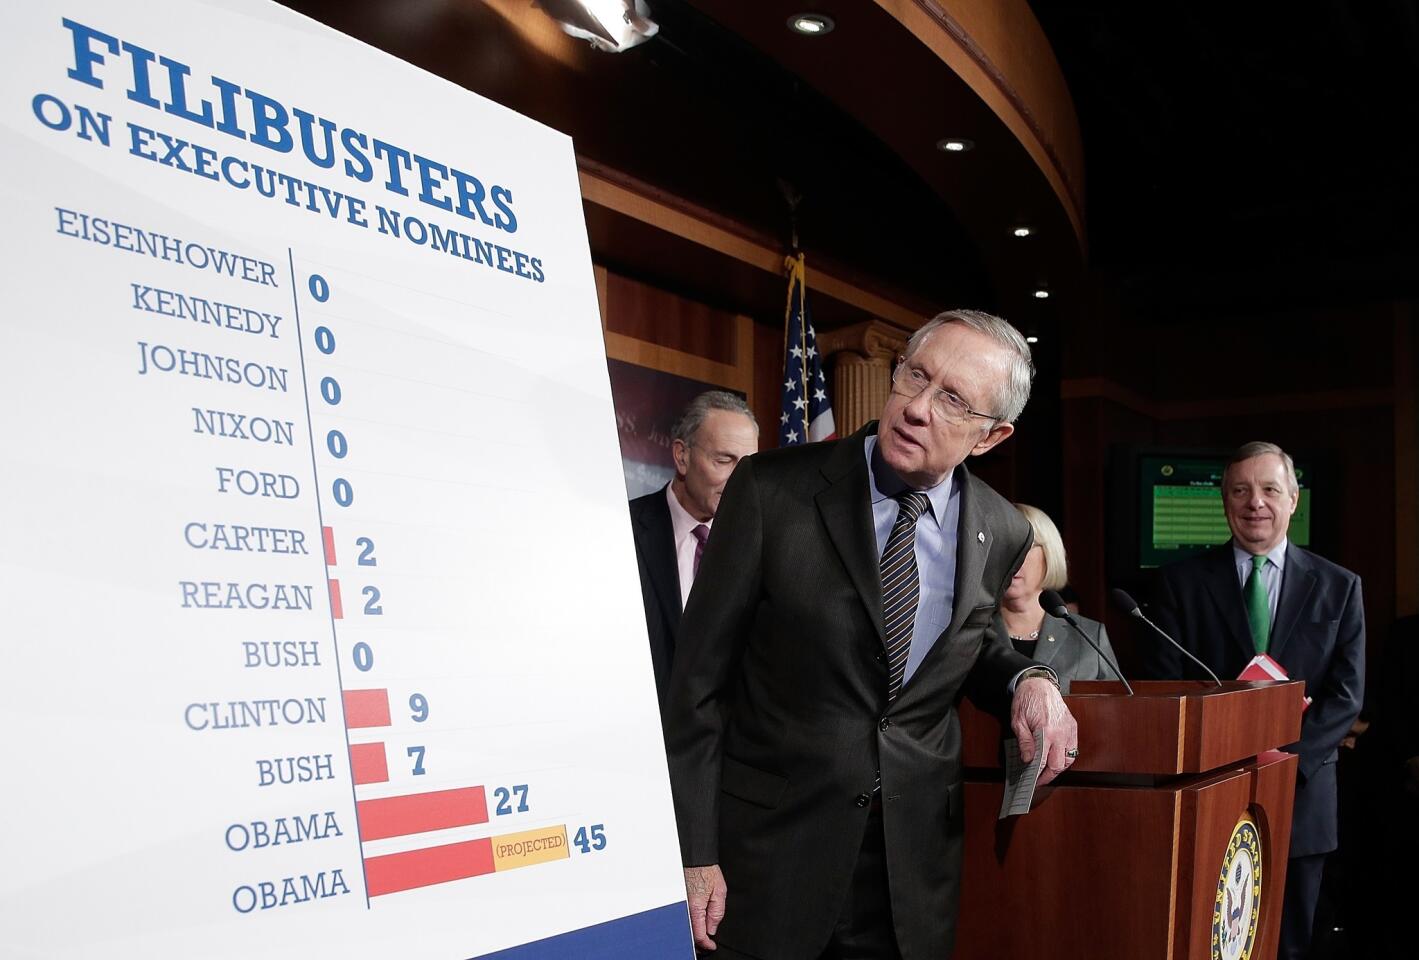 The filibuster, a Senate magic-math rule that reduces a majority vote into a minority